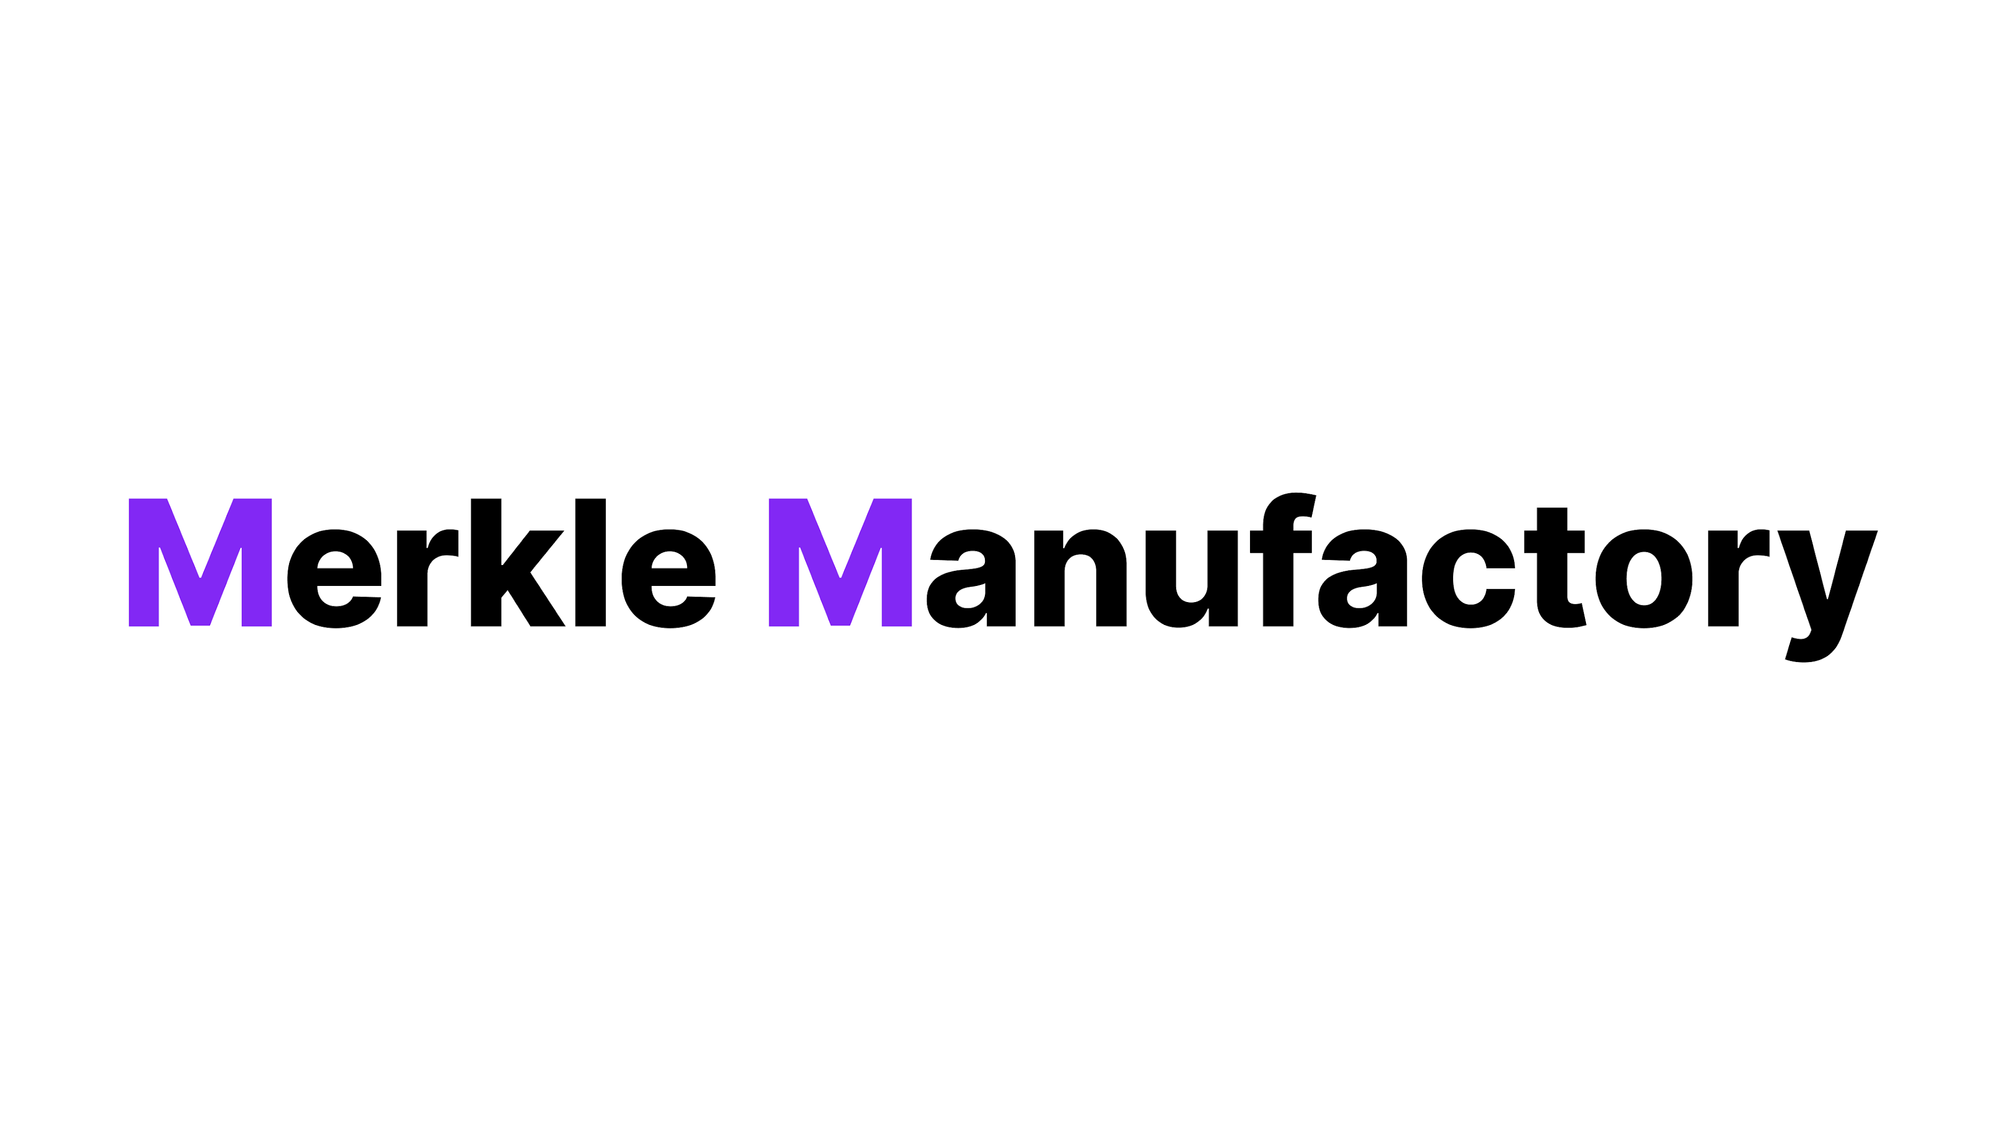 Merkle Manufactory Founded by Former Coinbase Executives Hits $1 billion Valuation